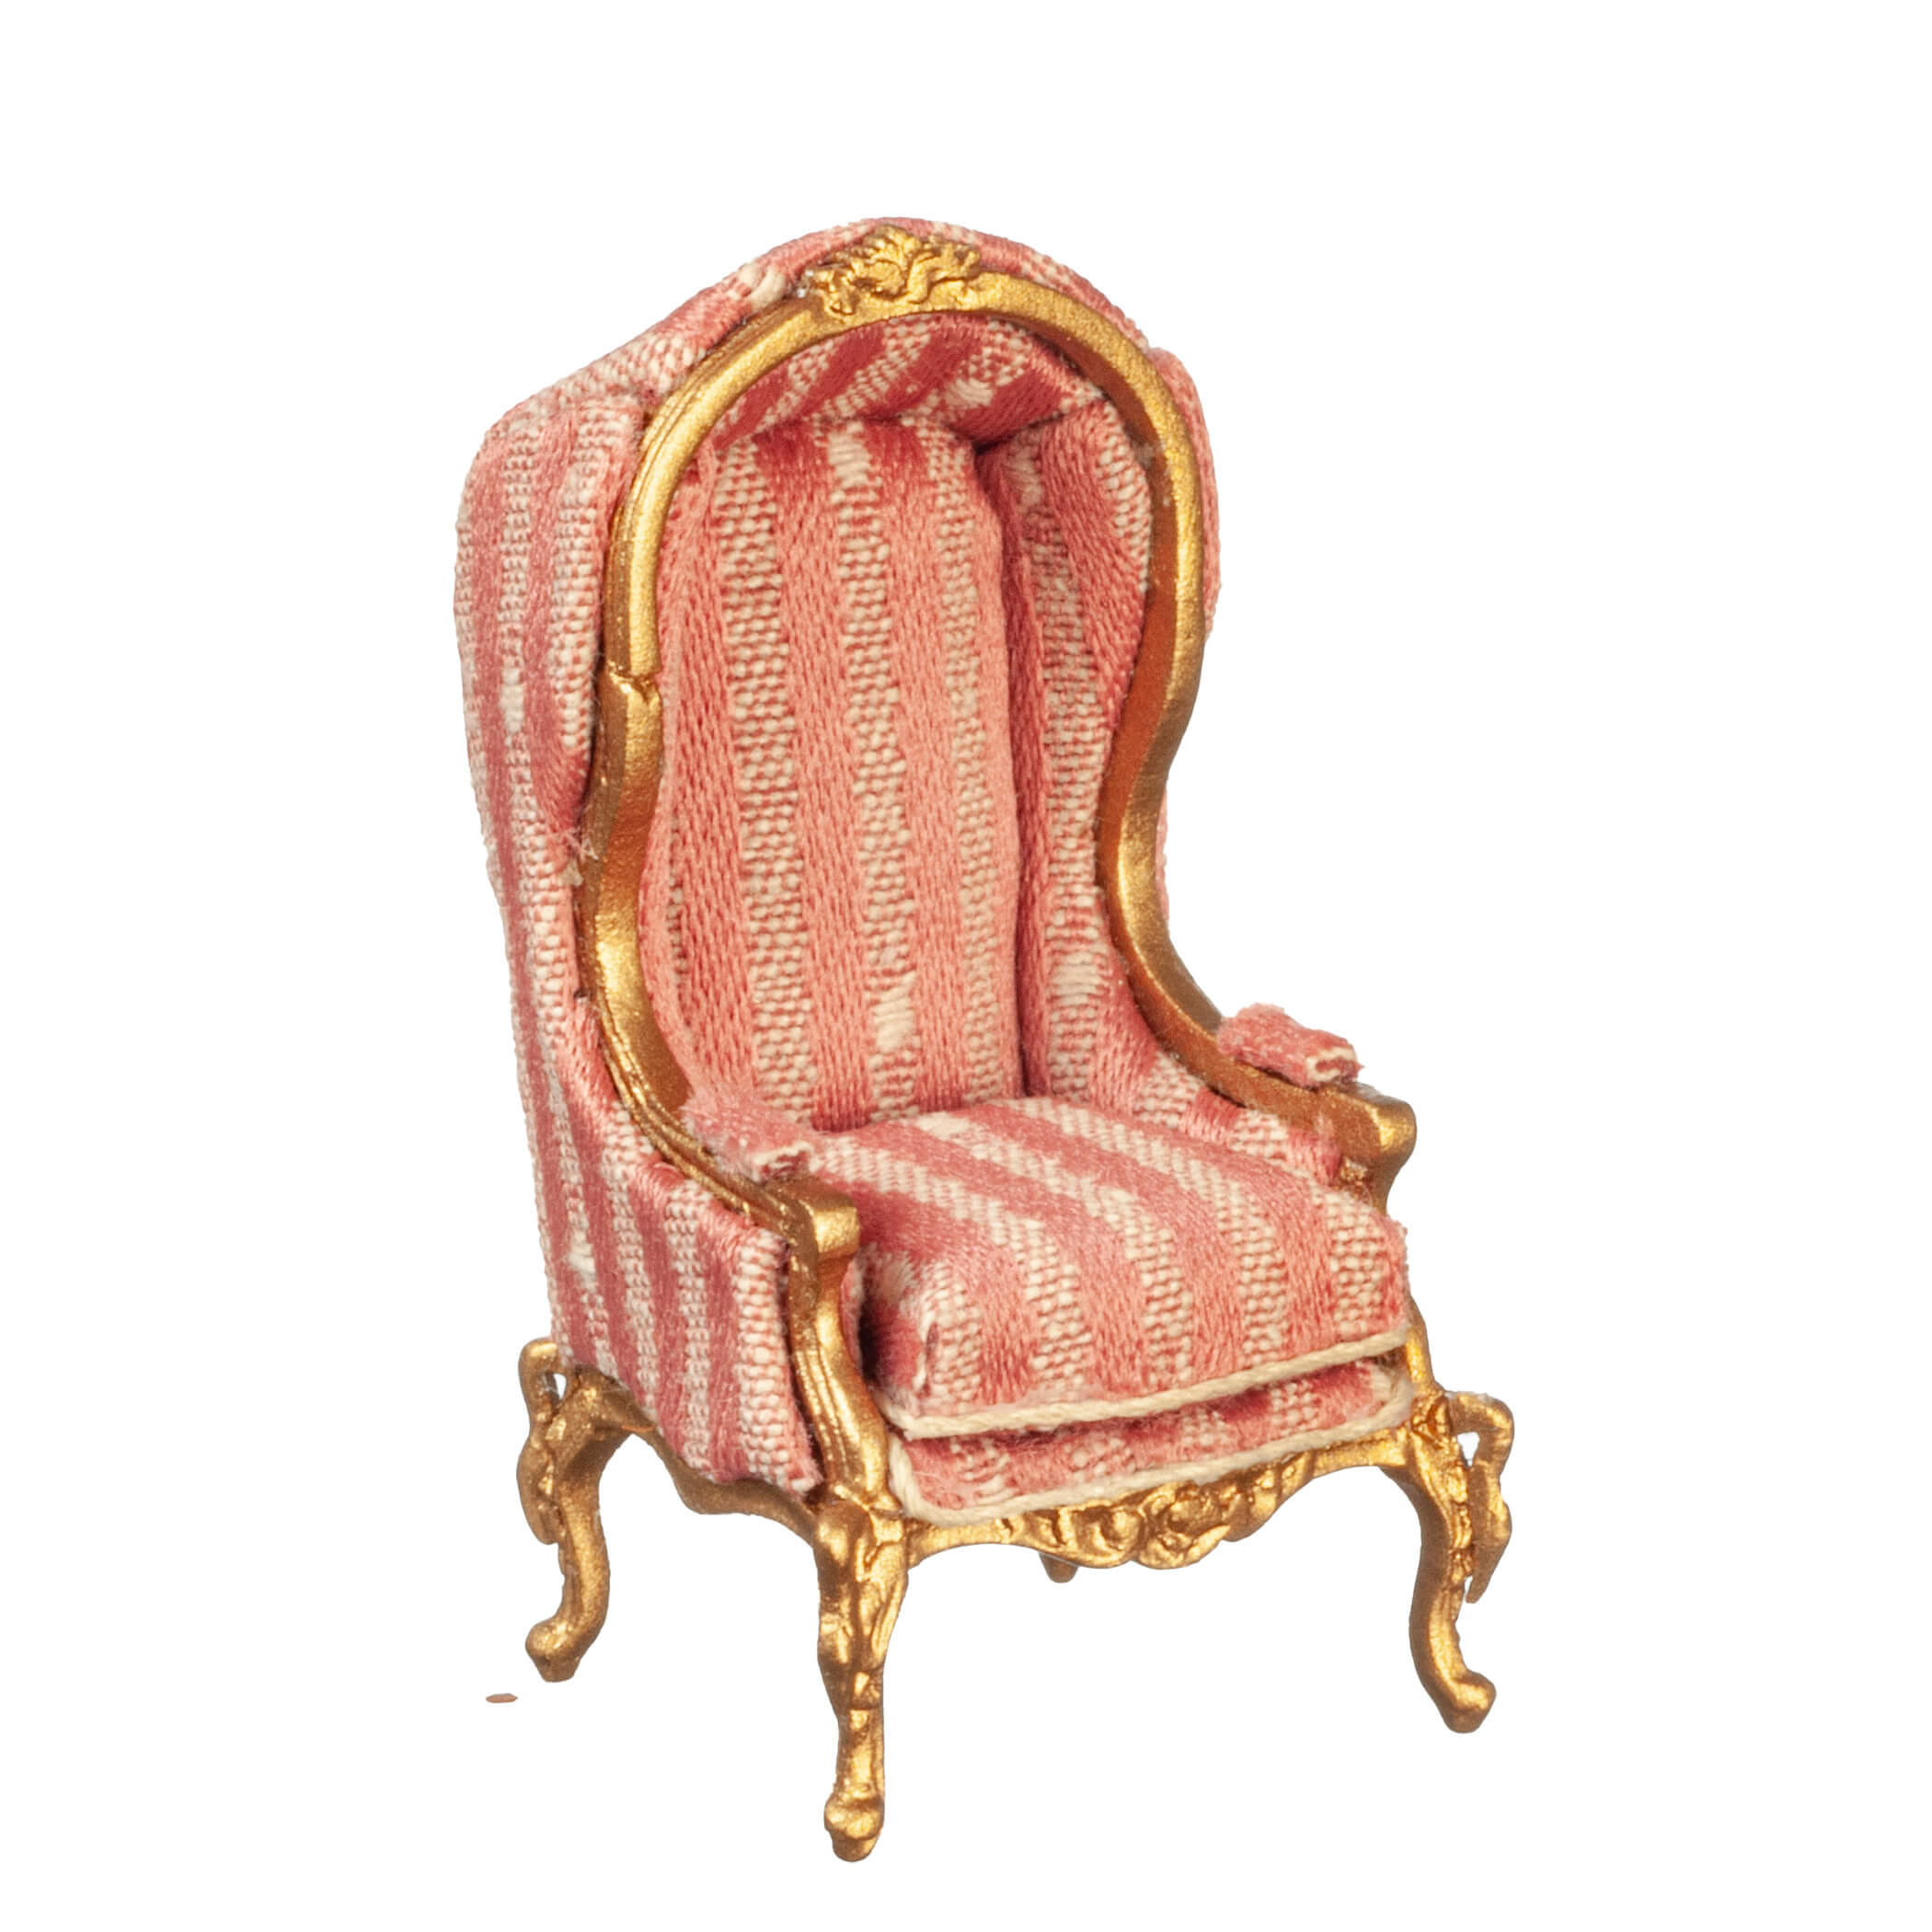 1/2in Scale Hooded Armchair Gold A